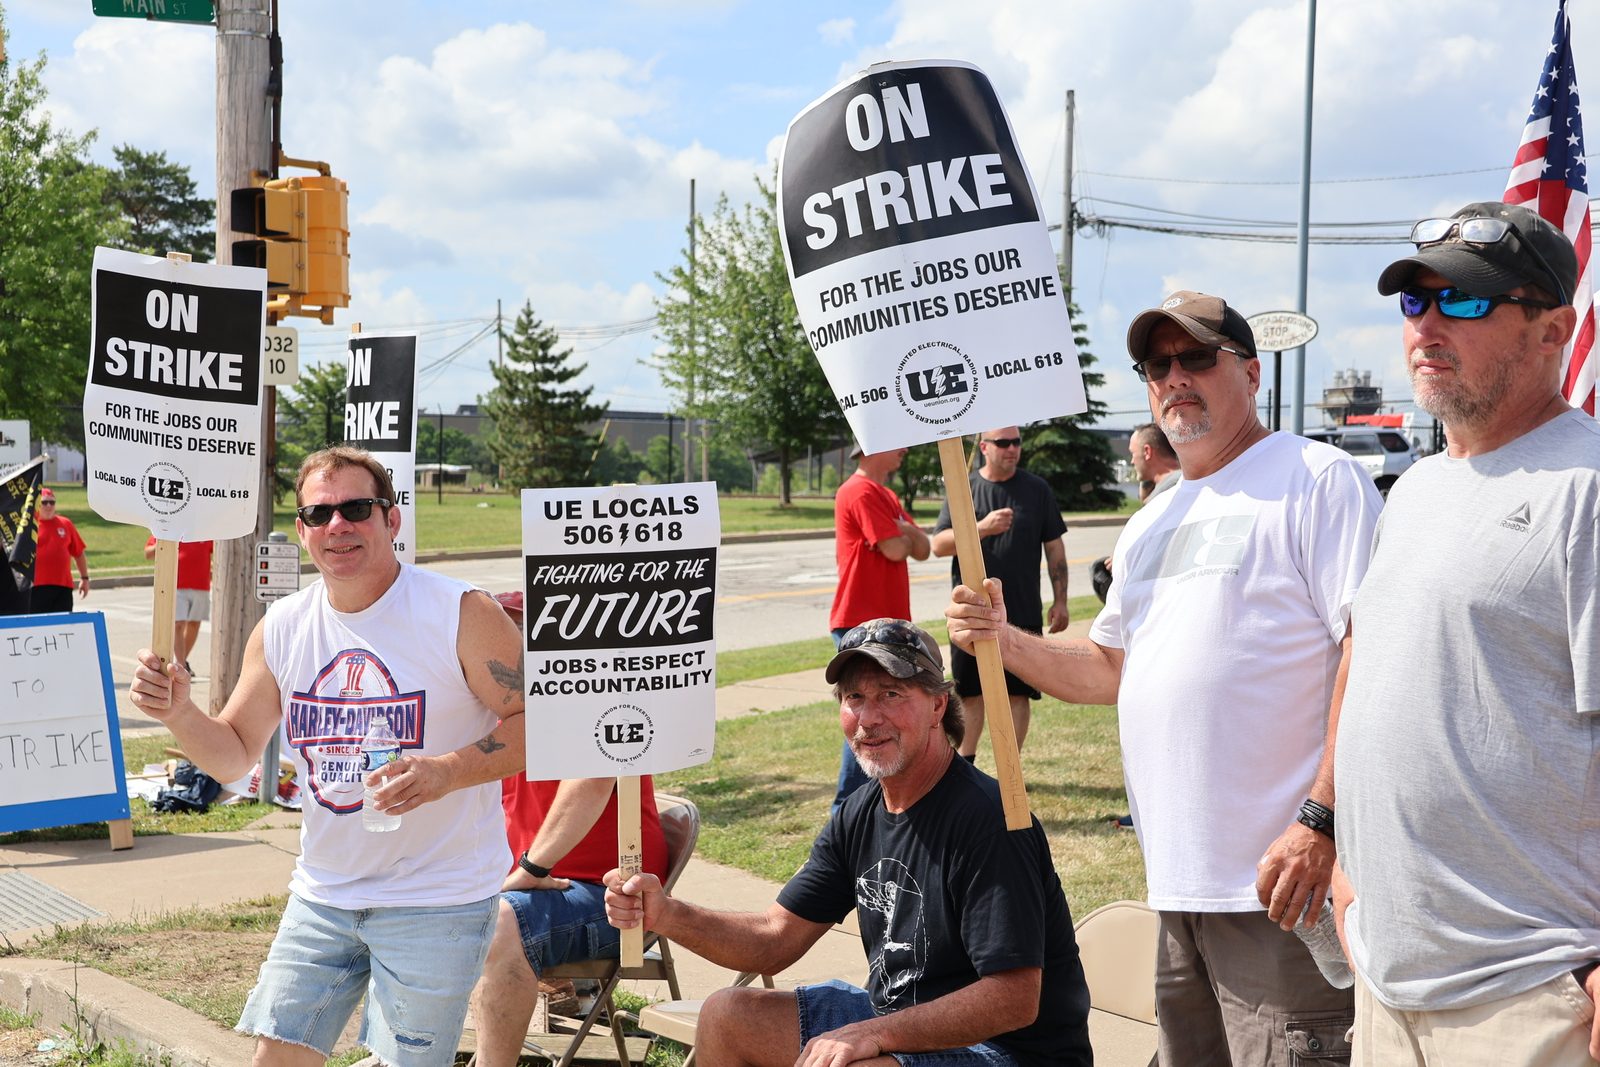 UE Local 506 members picketing in the sun; one worker holds a water bottle.